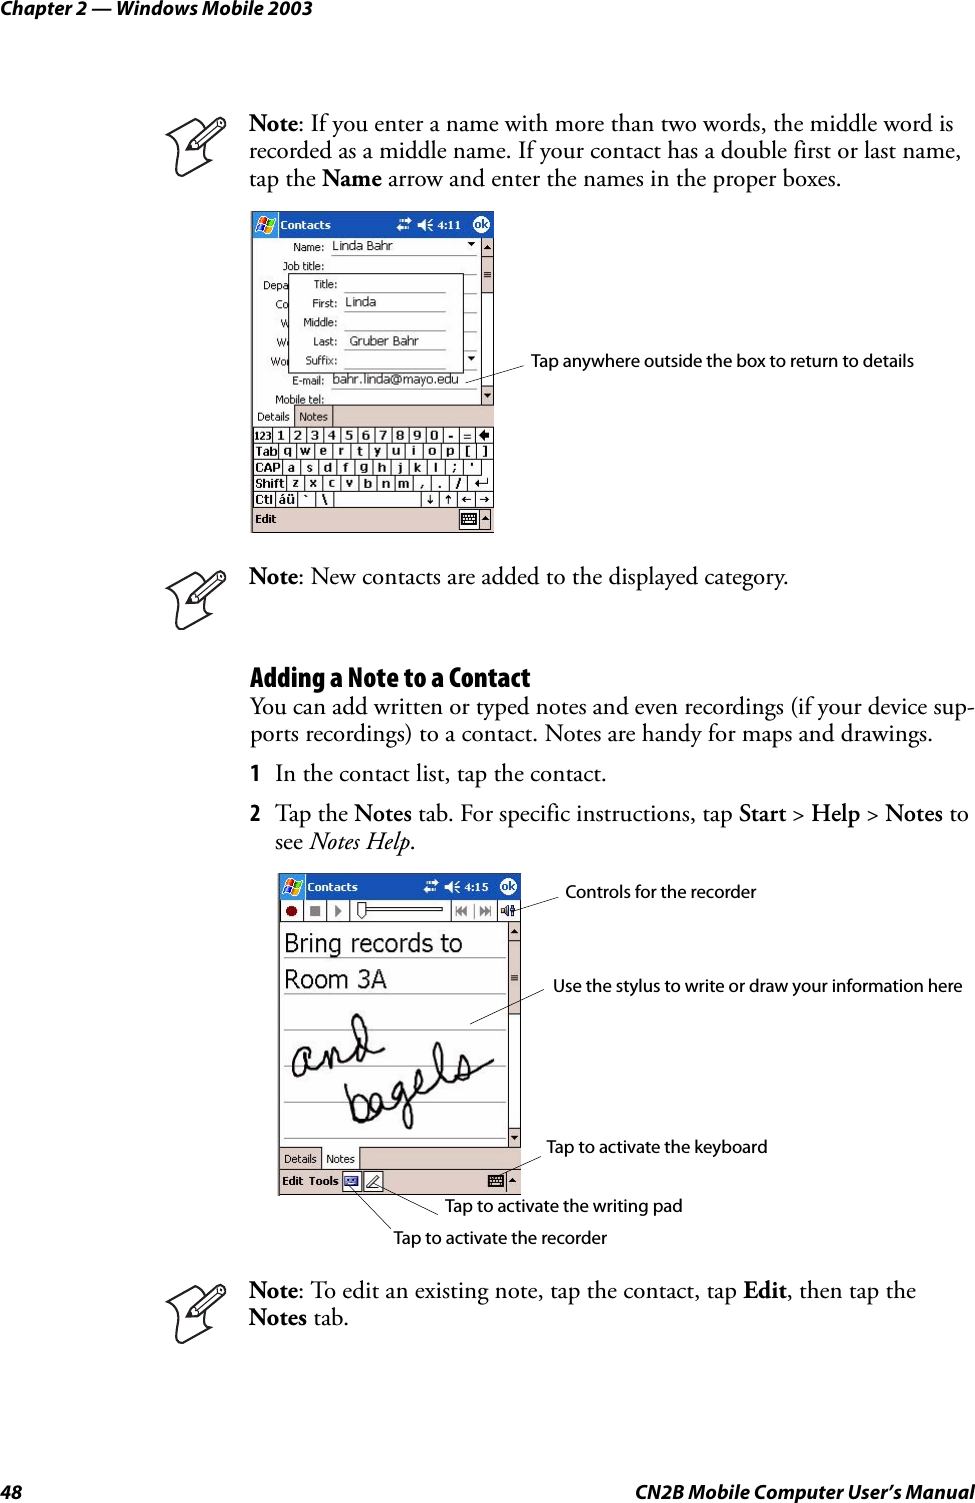 Chapter 2 — Windows Mobile 200348 CN2B Mobile Computer User’s ManualAdding a Note to a ContactYou can add written or typed notes and even recordings (if your device sup-ports recordings) to a contact. Notes are handy for maps and drawings.1In the contact list, tap the contact.2Tap the Notes tab. For specific instructions, tap Start &gt; Help &gt; Notes to see Notes Help.Note: If you enter a name with more than two words, the middle word is recorded as a middle name. If your contact has a double first or last name, tap the Name arrow and enter the names in the proper boxes.Note: New contacts are added to the displayed category.Note: To edit an existing note, tap the contact, tap Edit, then tap the Notes tab.Tap anywhere outside the box to return to detailsControls for the recorderUse the stylus to write or draw your information hereTap to activate the recorderTap to activate the writing padTap to activate the keyboard